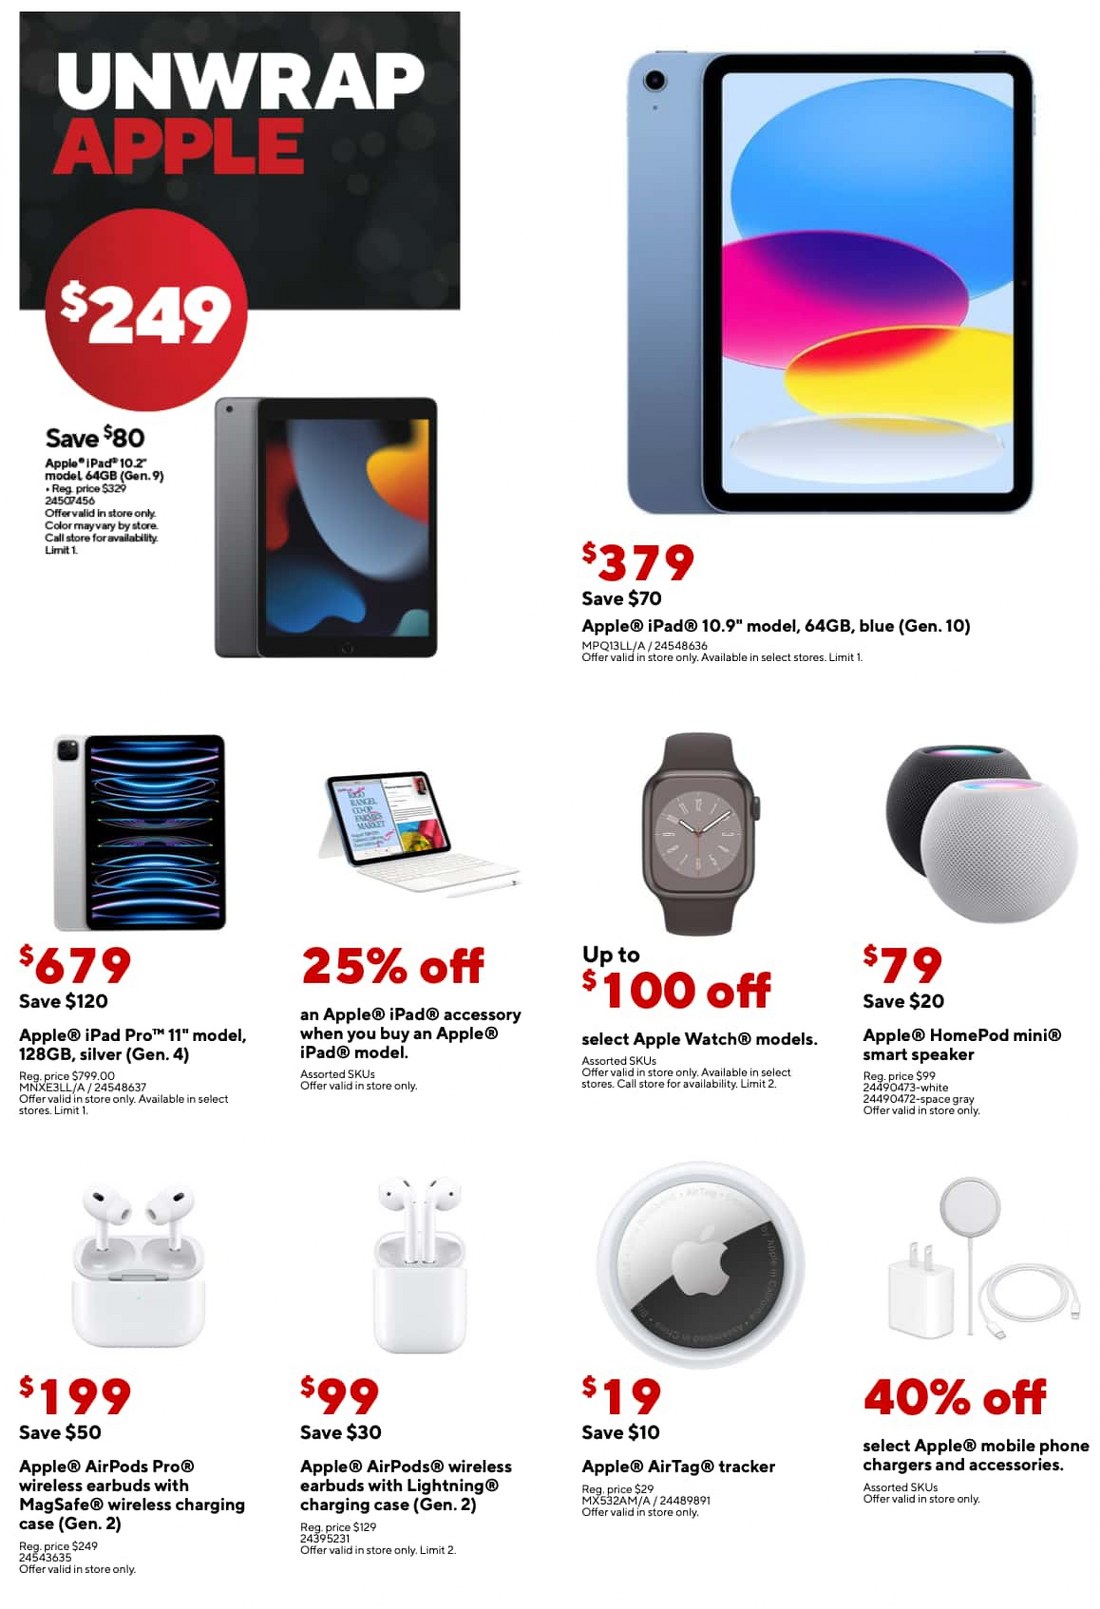 Staples Black Friday July 2024 Weekly Sales, Deals, Discounts and Digital Coupons.